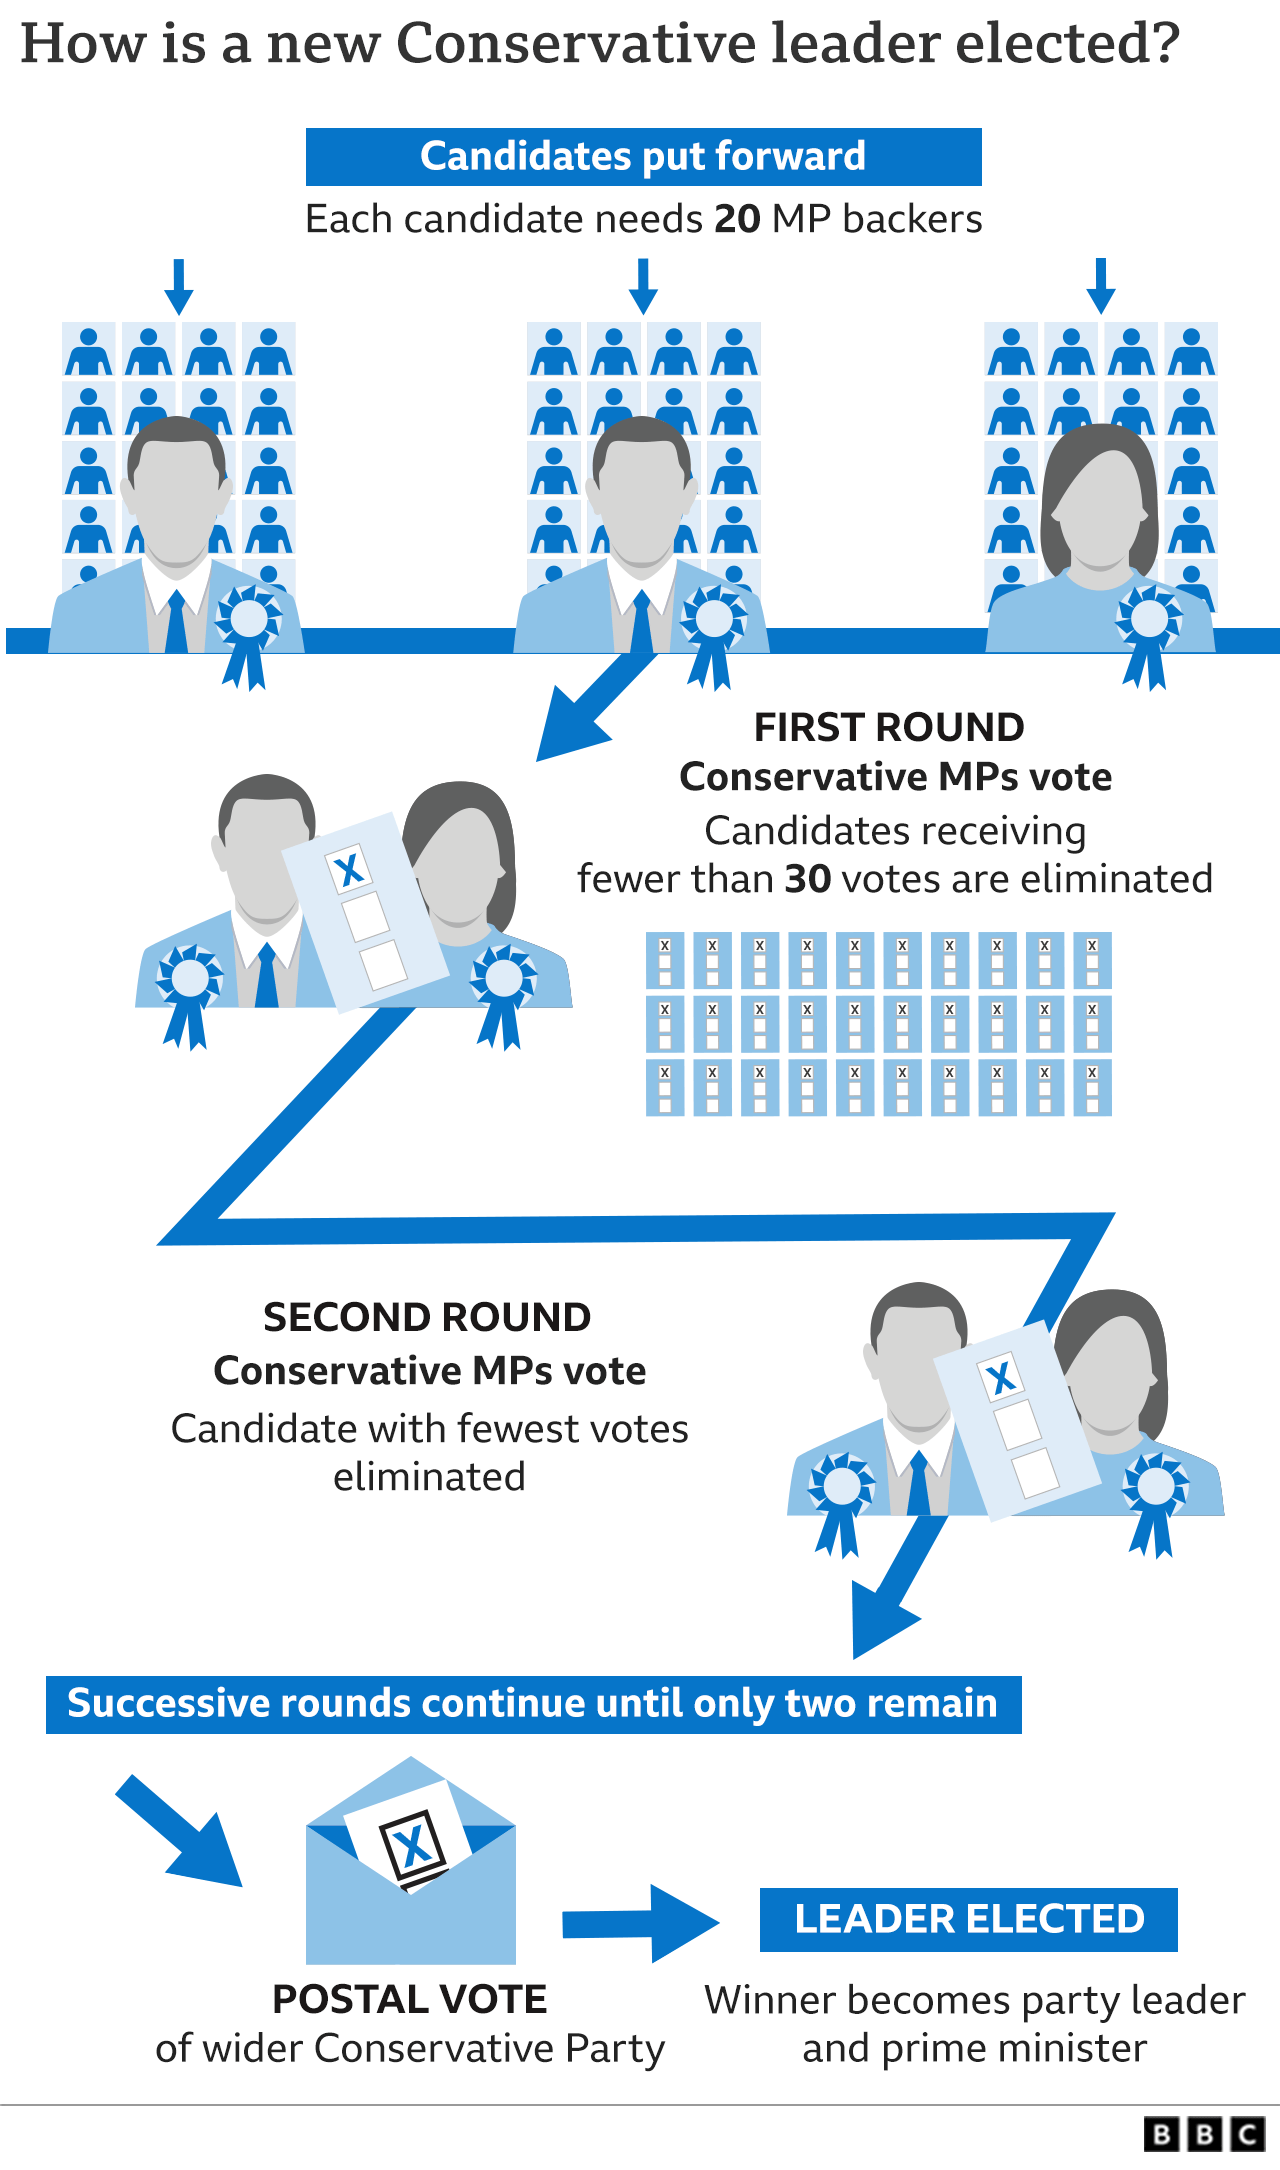 The process for electing a new PM and Conservative party leader